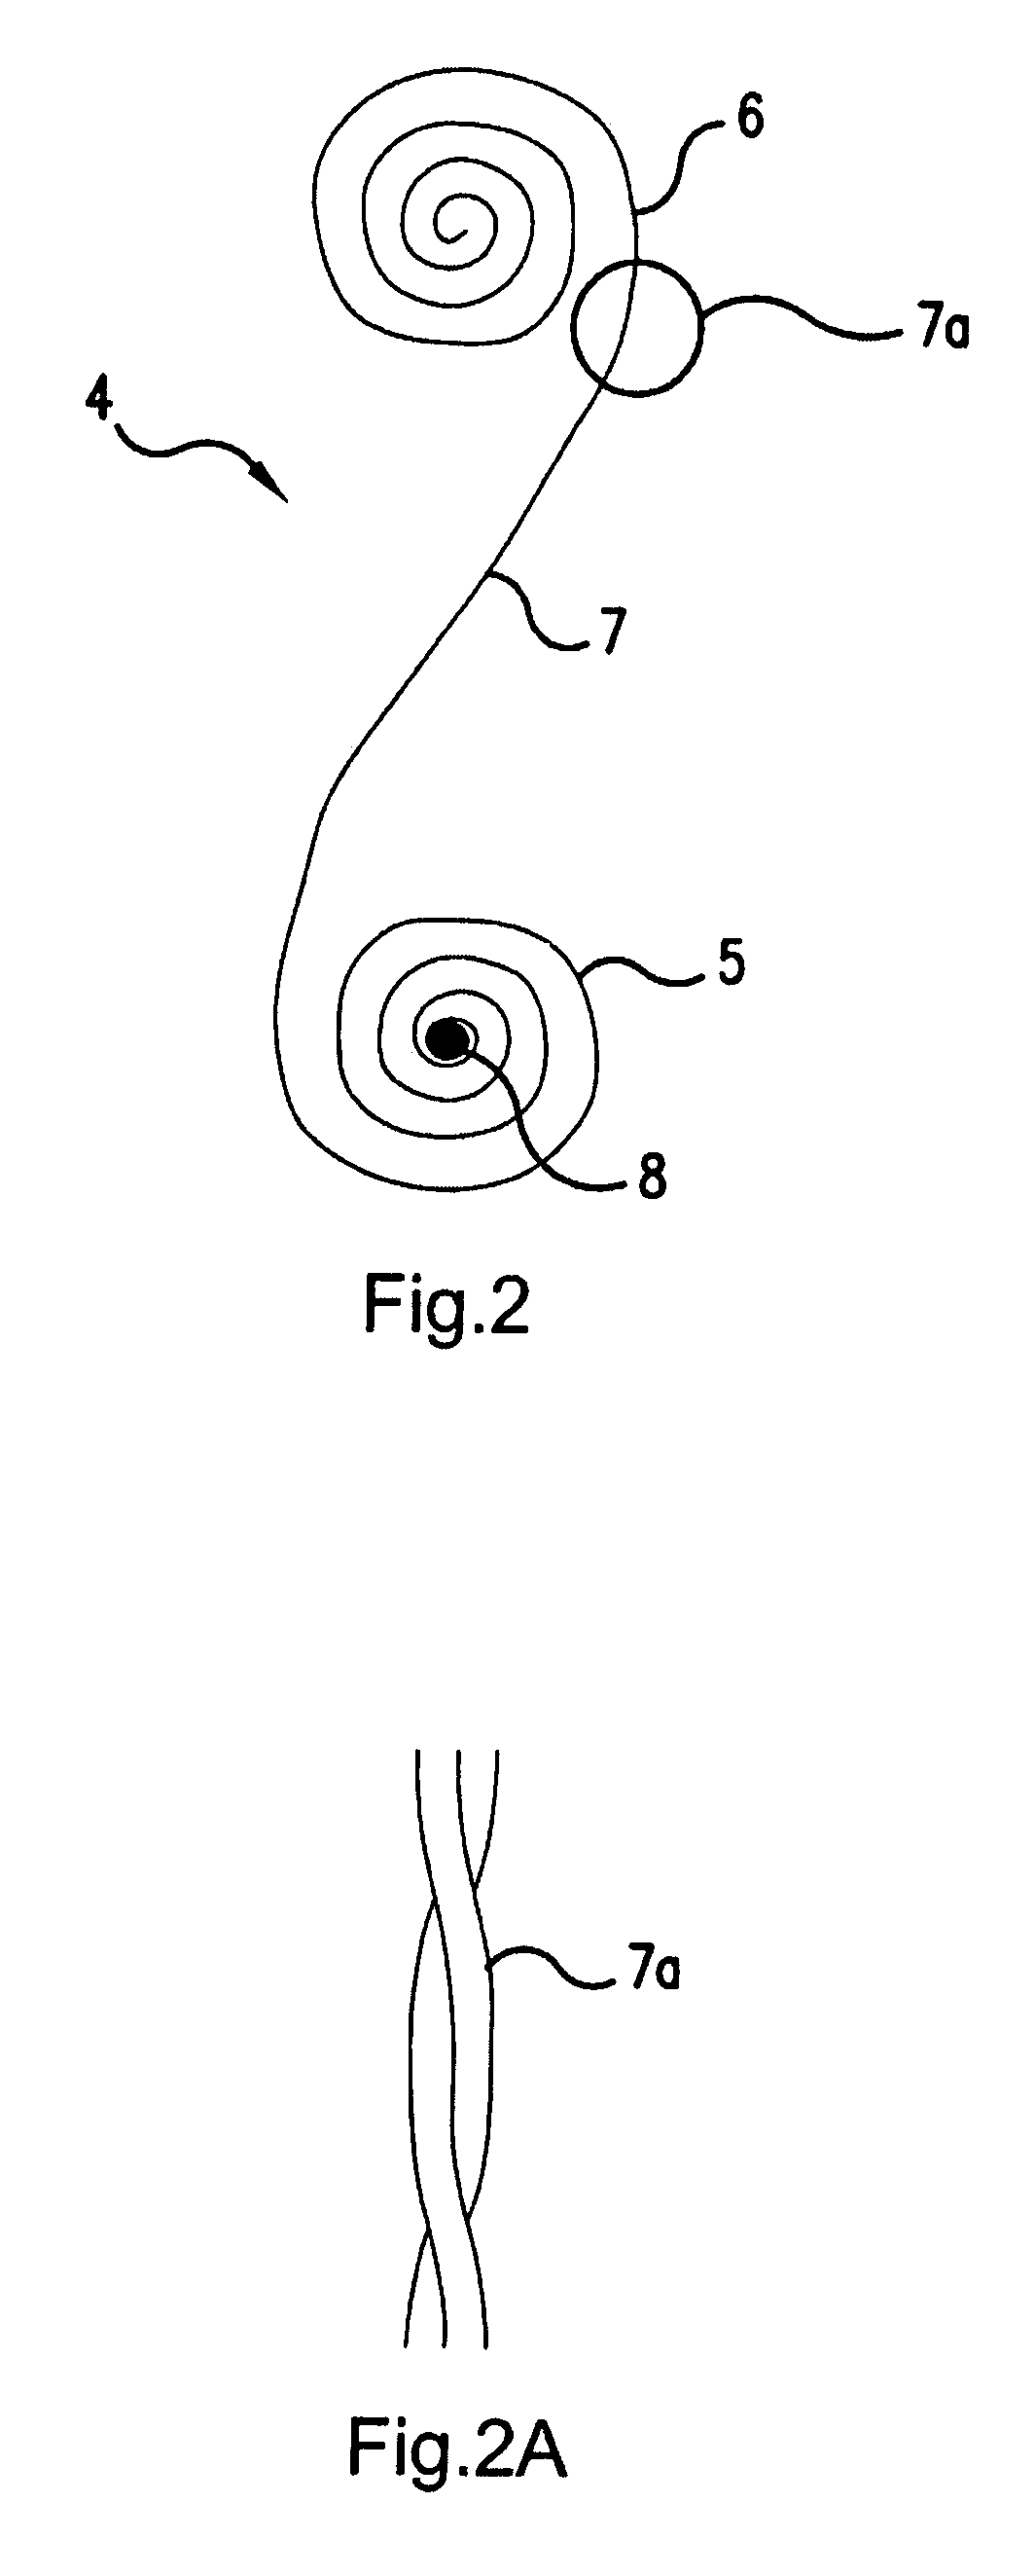 Device for shielding electronic units including a transmitting/receiving equipment, and especially for shielding mobile phones